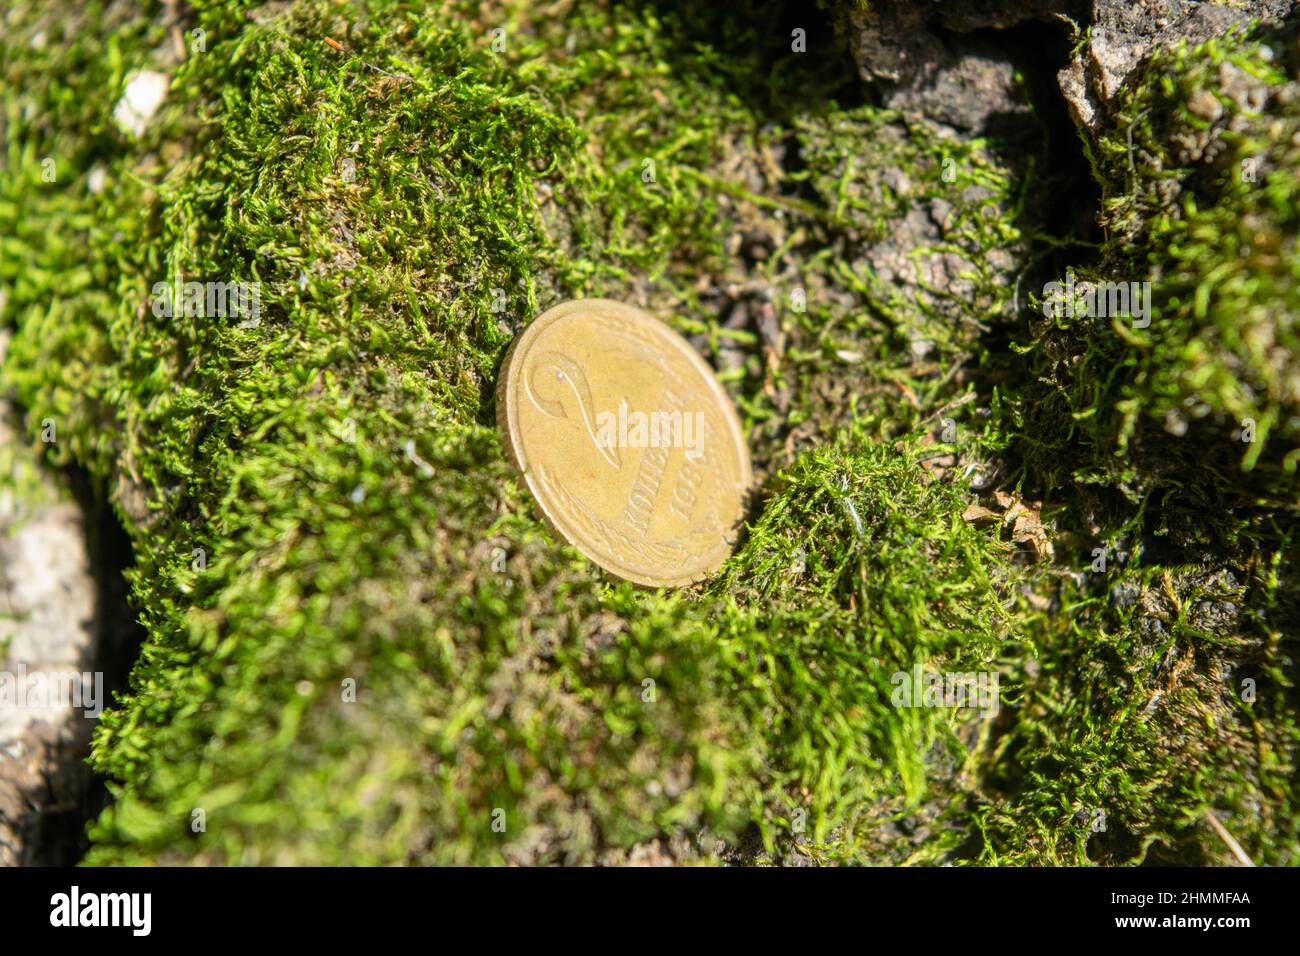 Old coins in the forest on green moss Stock Photo